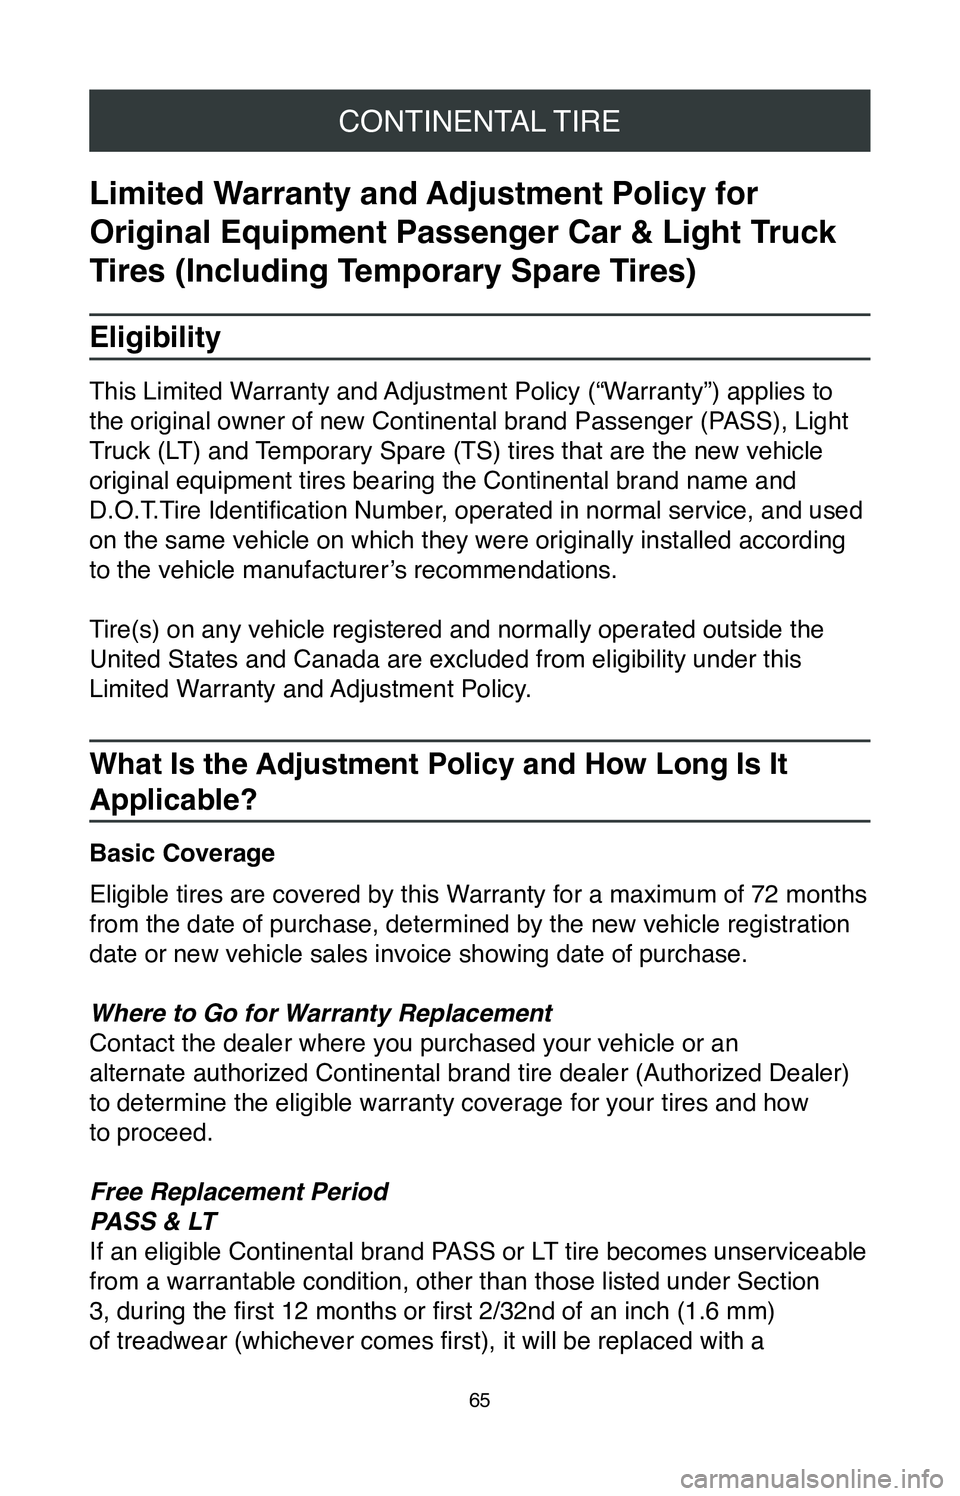 TOYOTA MIRAI 2020  Warranties & Maintenance Guides (in English) CONTINENTAL TIRE
65
Limited Warranty and Adjustment Policy for 
Original Equipment Passenger Car & Light Truck 
Tires (Including Temporary Spare Tires)
Eligibility
This Limited Warranty and Adjustment